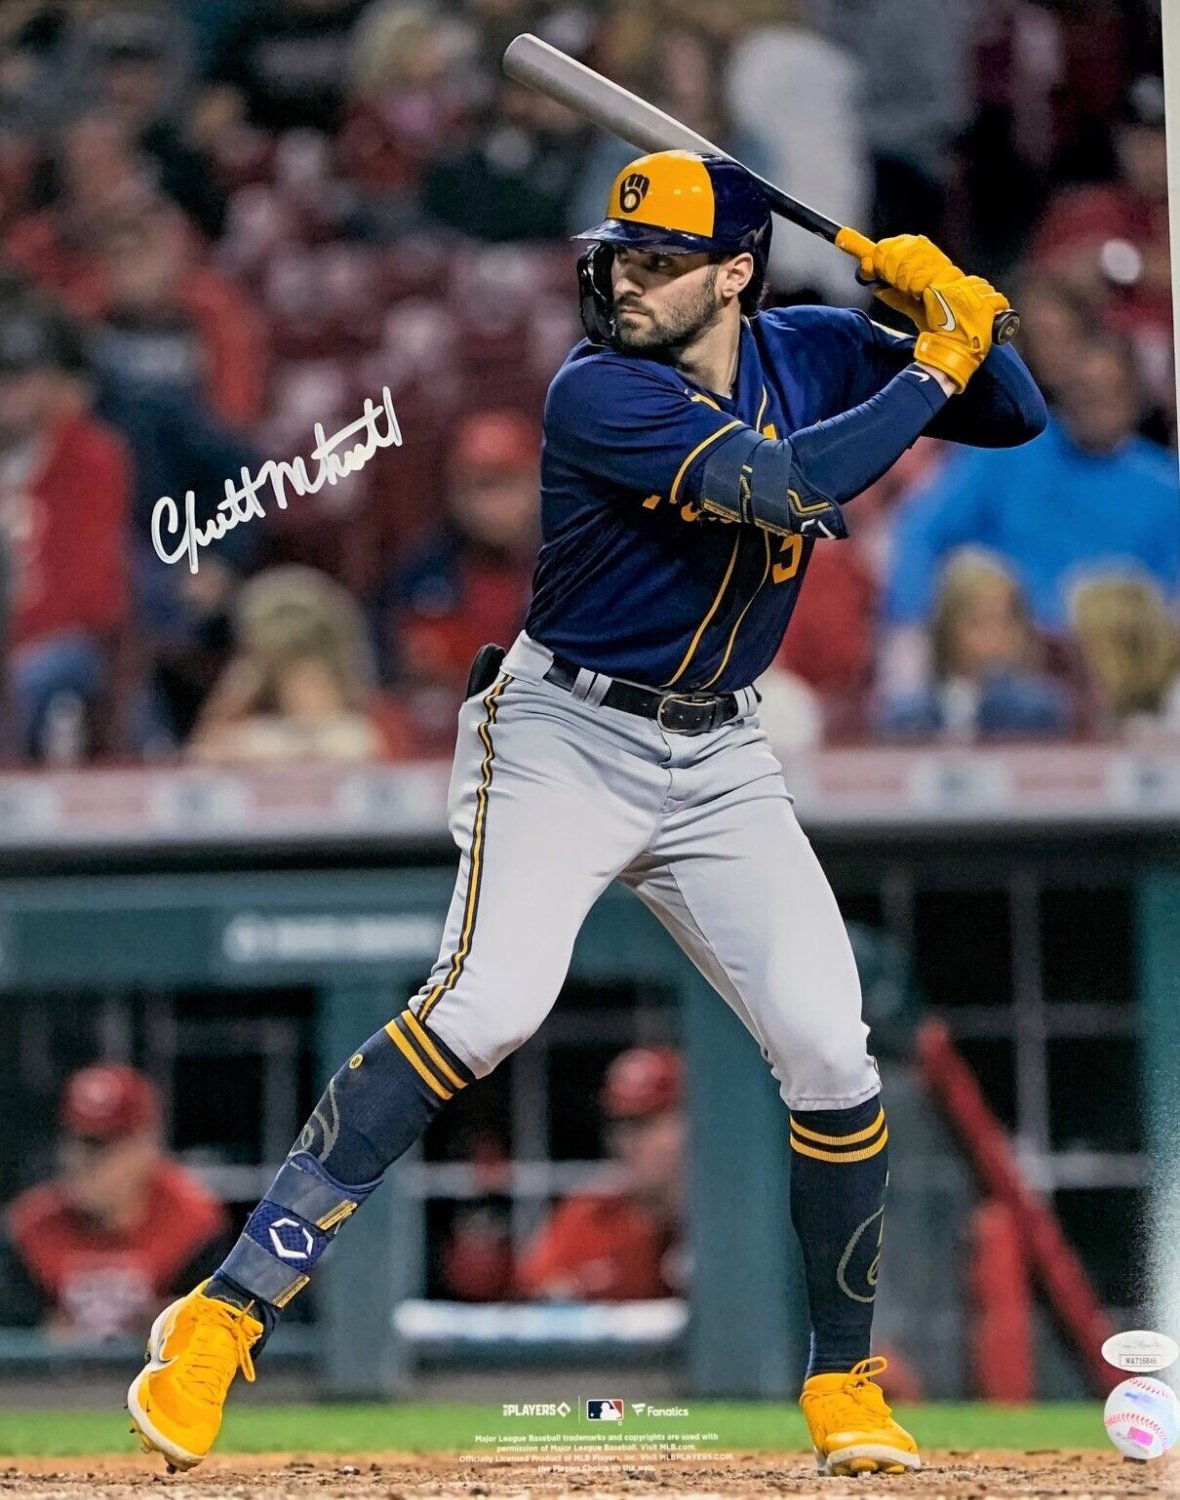 Garrett Mitchell Autographed Signed Brewers Outfield Prospect